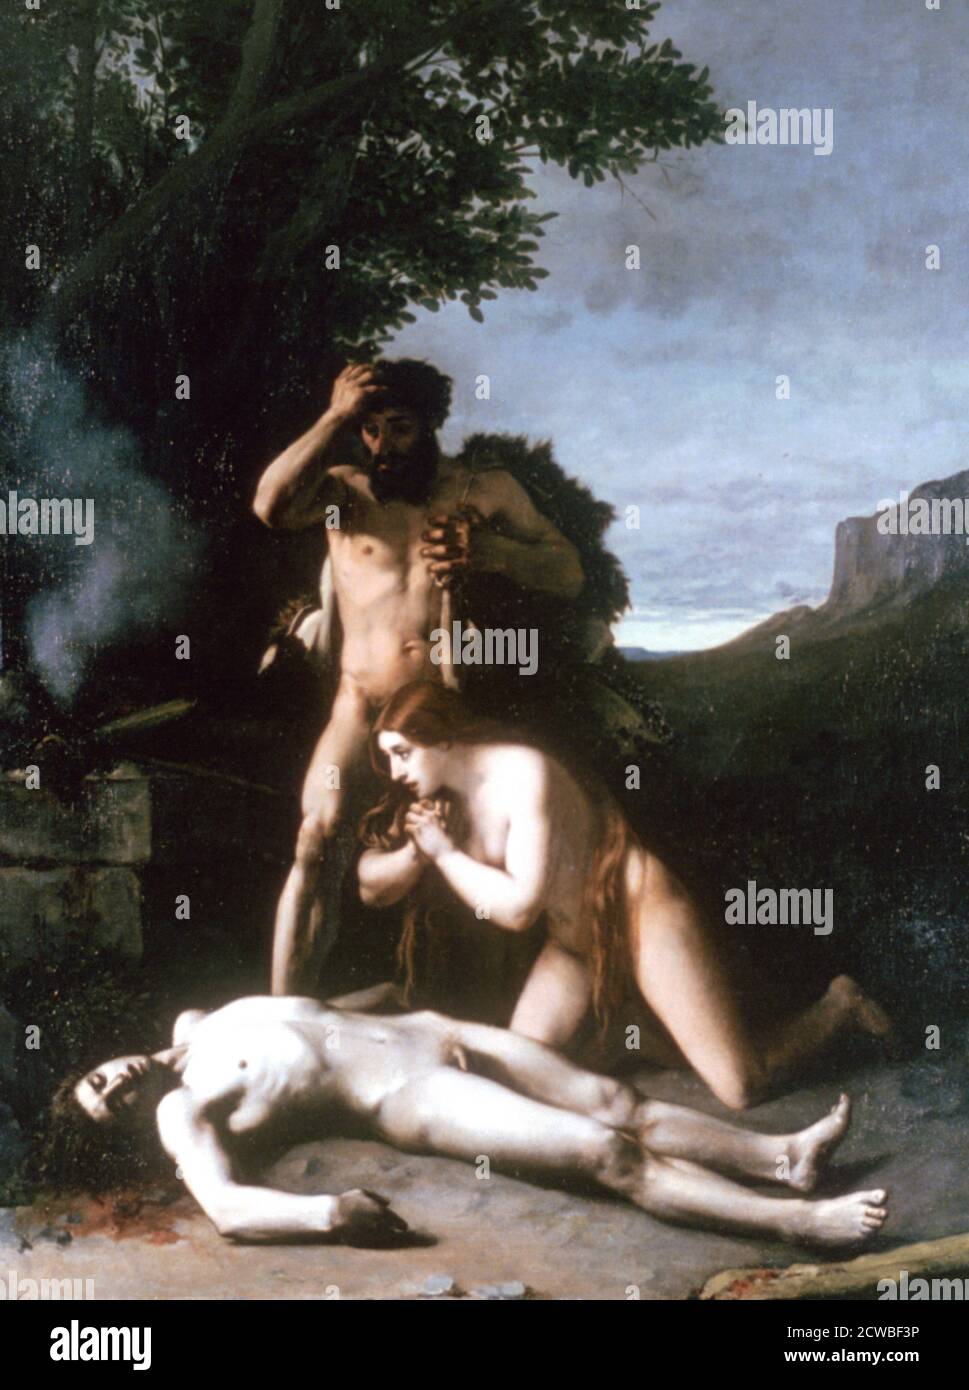 Adam and Eve finding the Body of Abel', 1858 Artist: Jean Jacques Henner. Adam and Eve were the first man and woman created by God according to the Bible and the Qur'an. Stock Photo